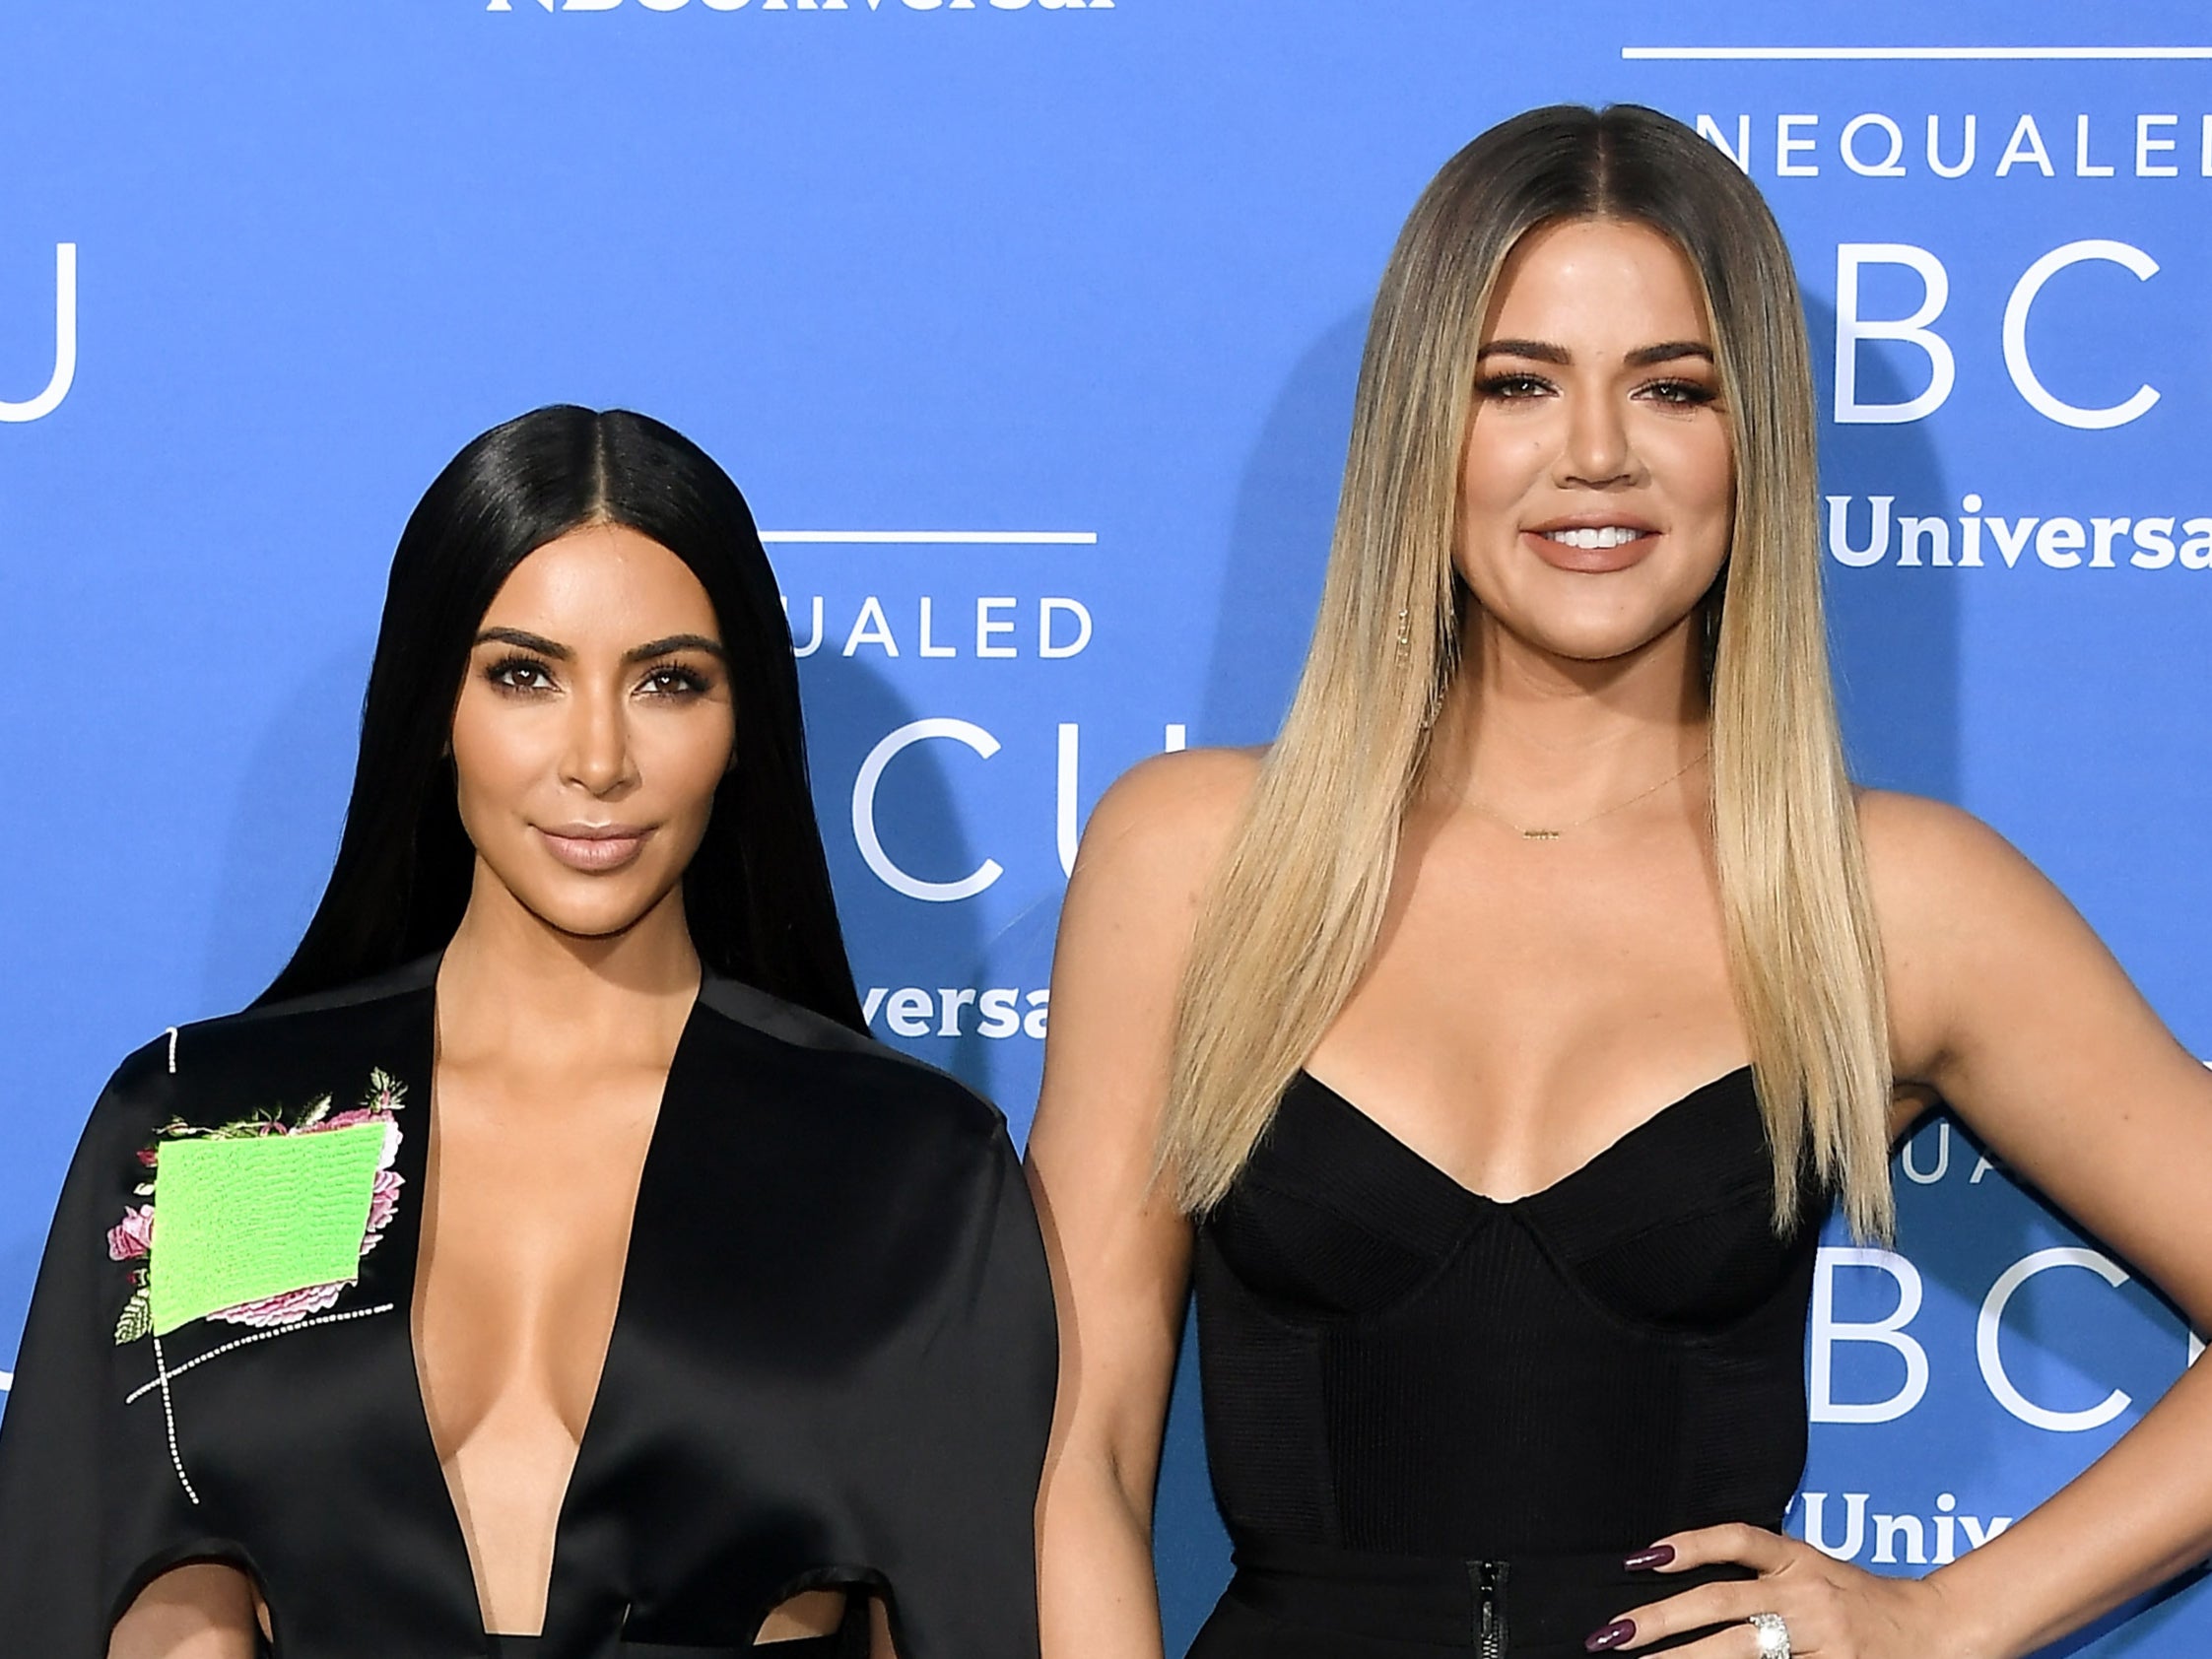 Kim Kardashian, left, and Khloe Kardashian. Trump allegedly called Khloe a ‘fat piglet’ on the set of The Apprentice, and said he felt betrayed by Kim after she celebrated Joe Biden’s election victory in 2020